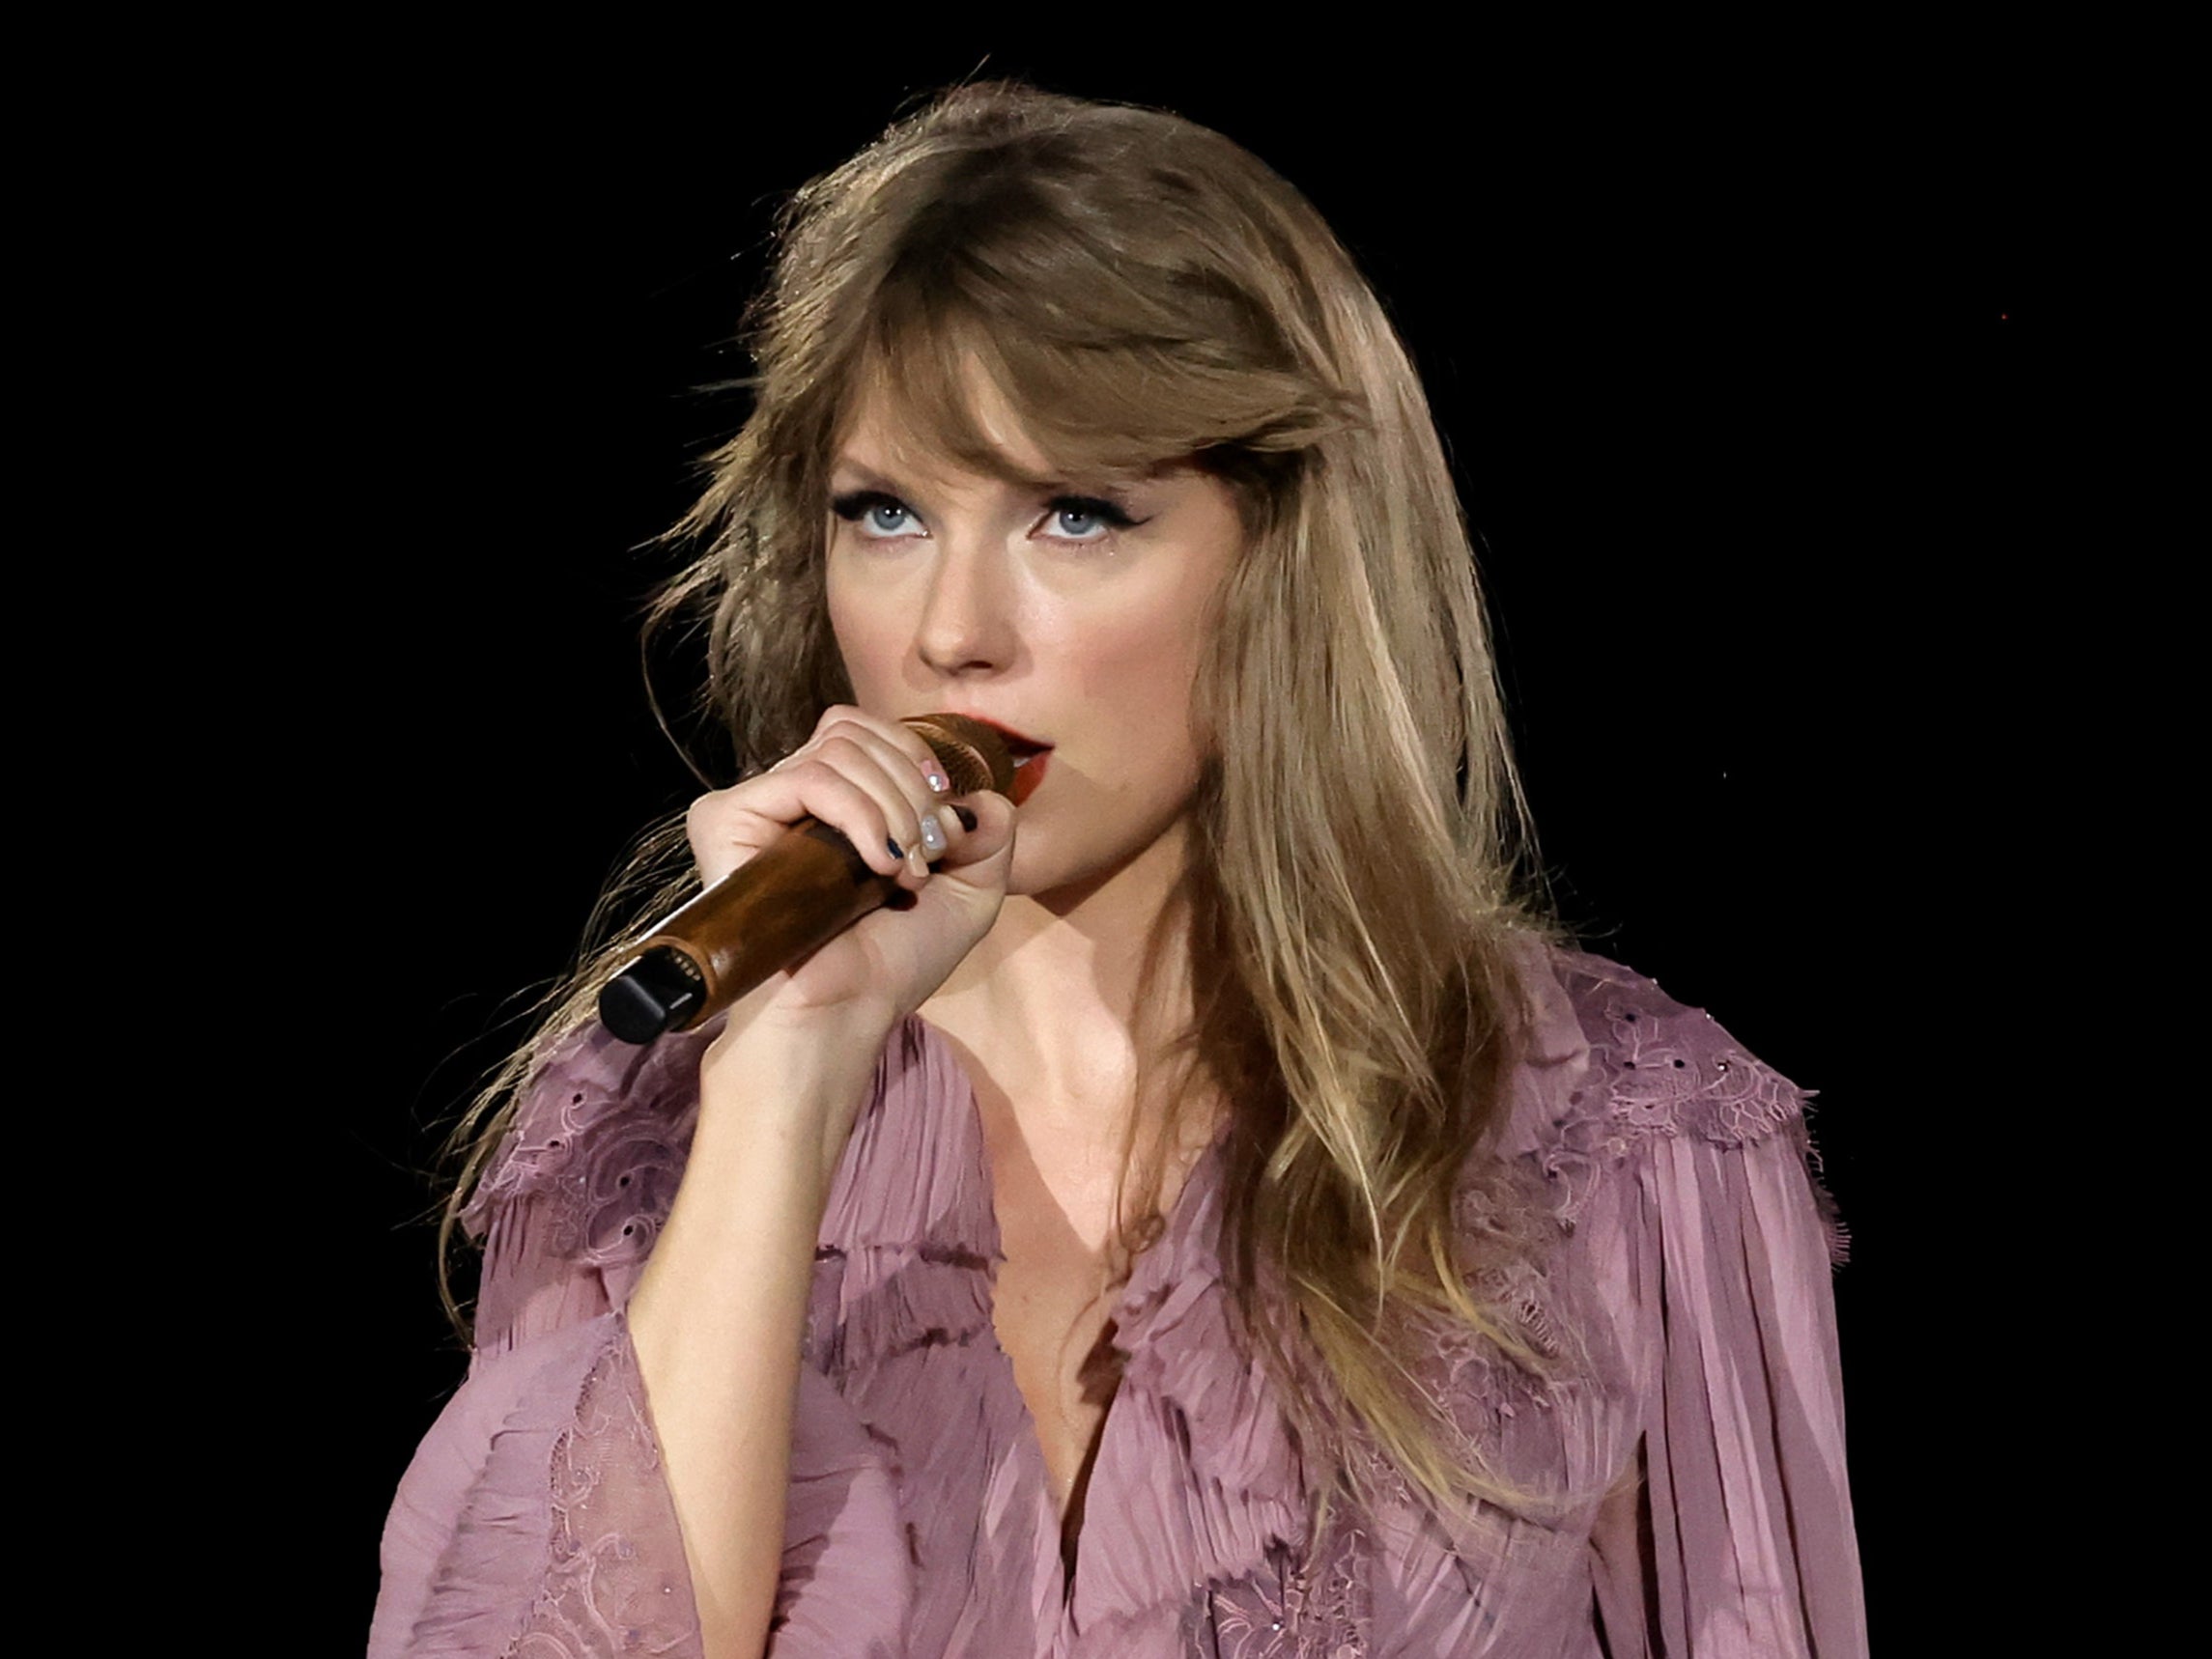 Taylor Swift released her self-titled debut album as a teenager in 2006